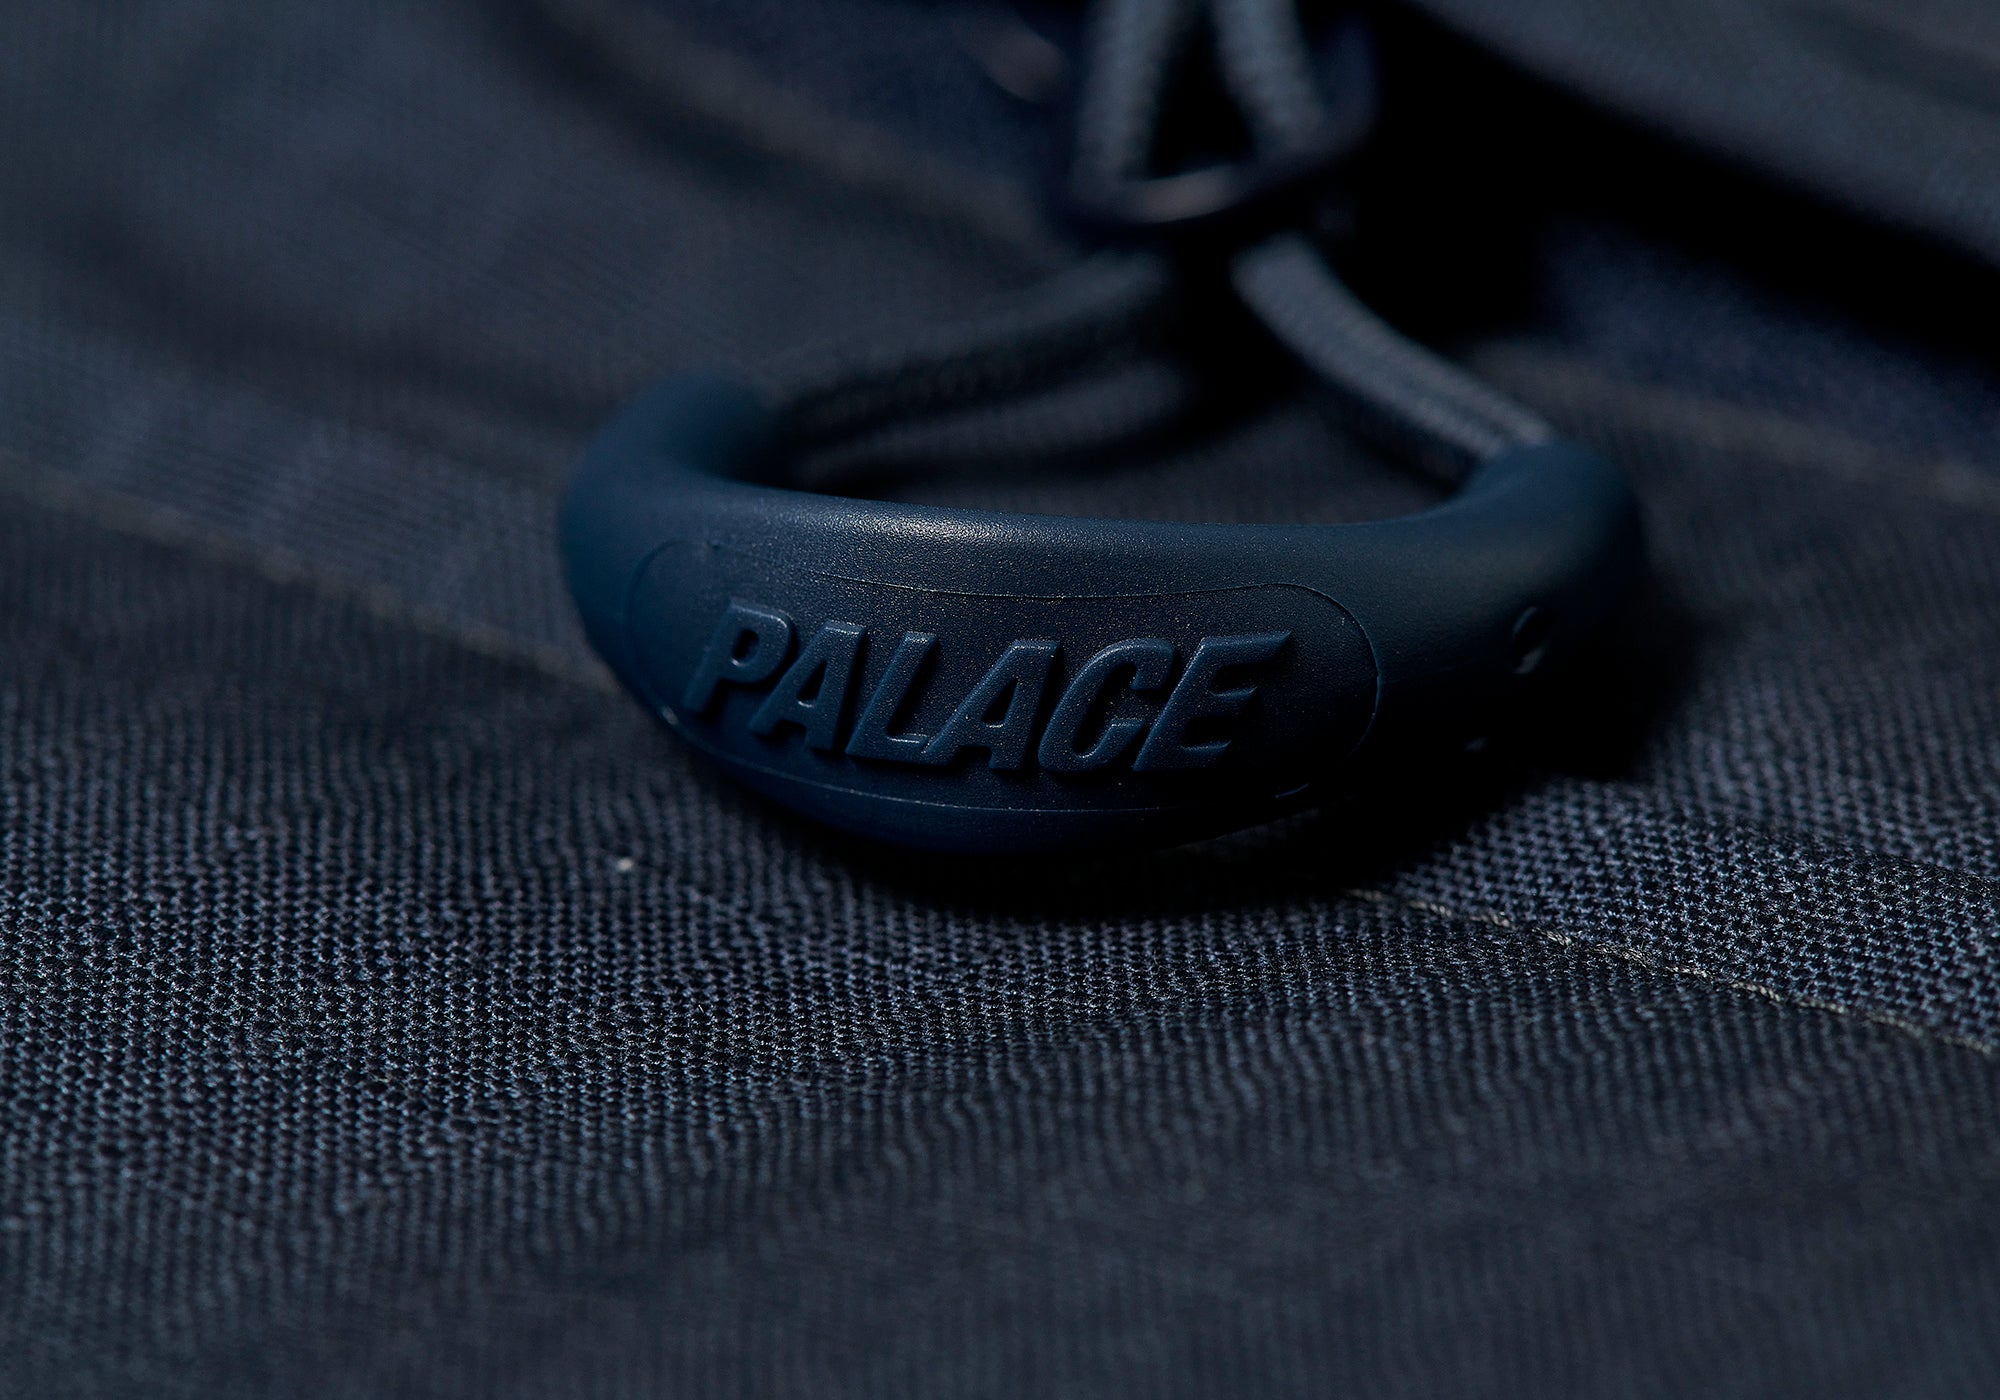 Gore-Tex Cotton Rs Jacket Navy - Winter 2023 - Palace Community